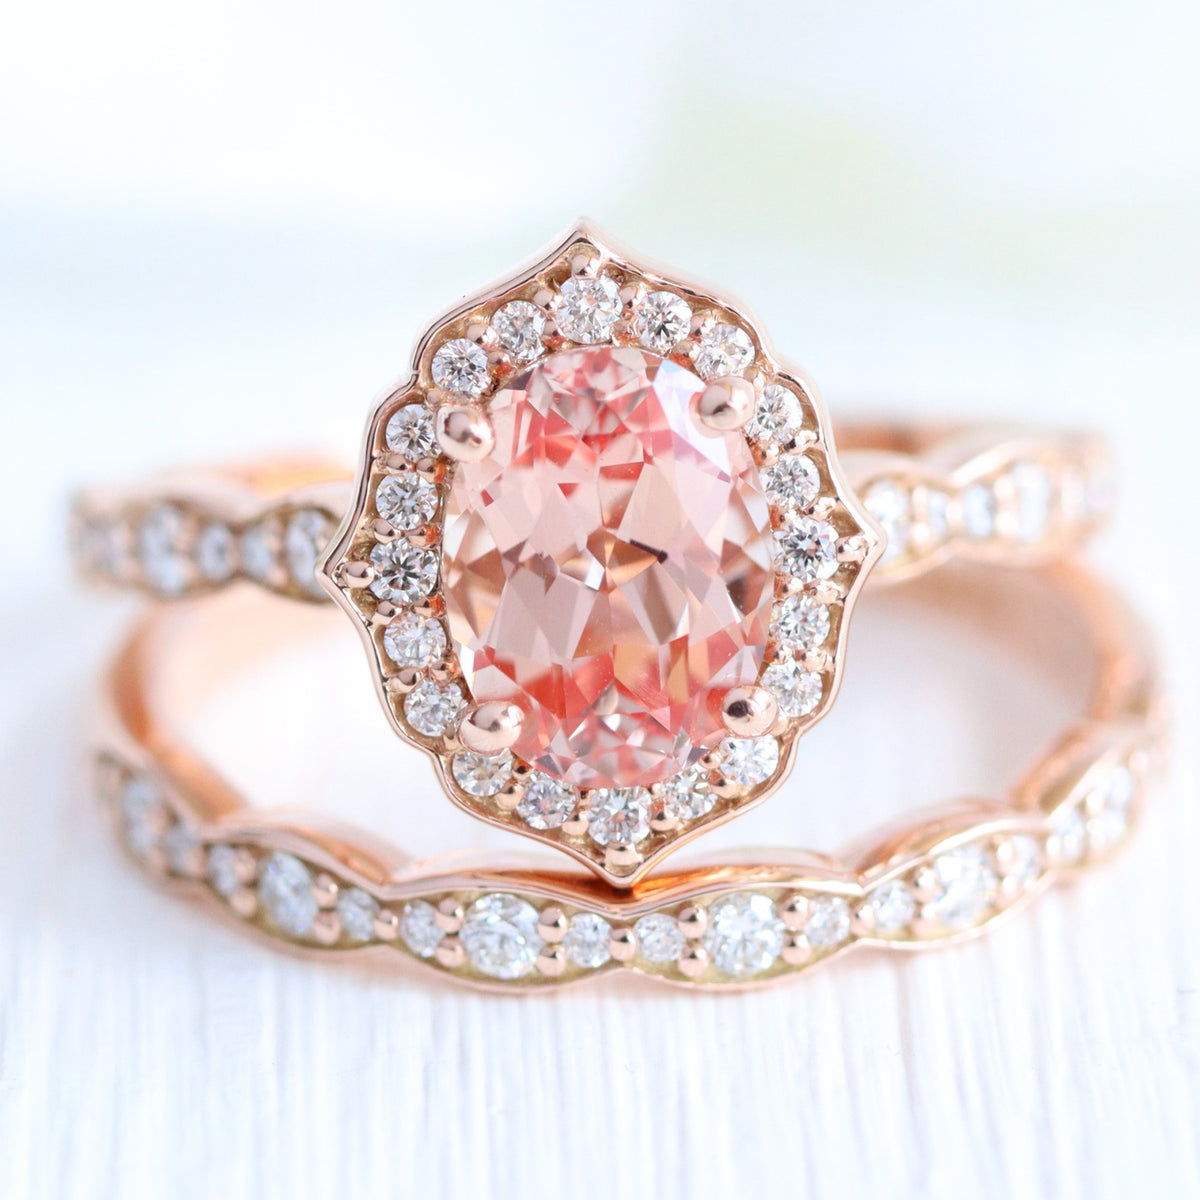 Vintage Floral Oval Ring Bridal Set w/ Champagne Peach Sapphire and Diamond